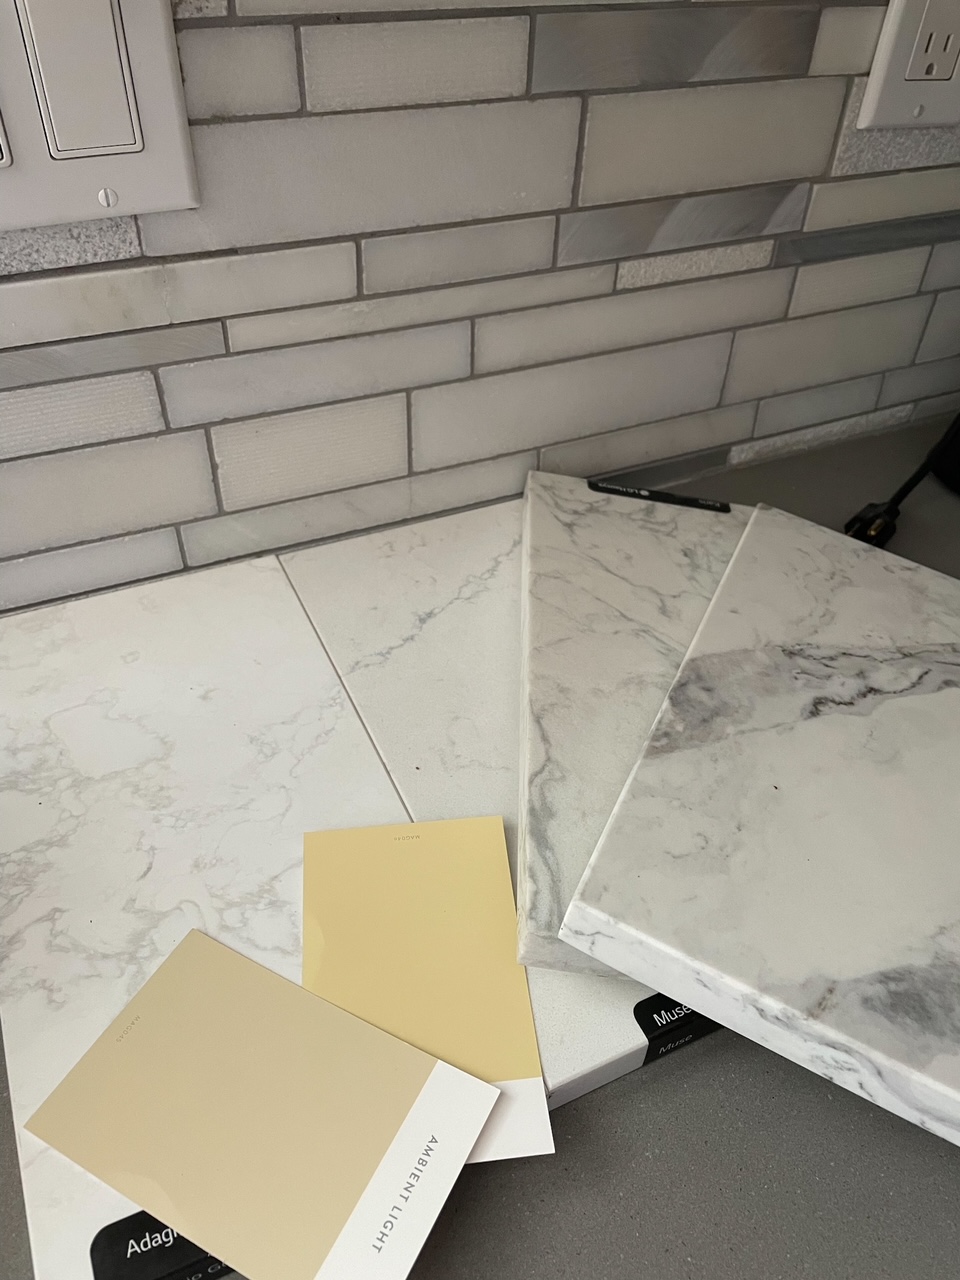 The white marble countertop that Marie chose for her counter top remodeling before and after